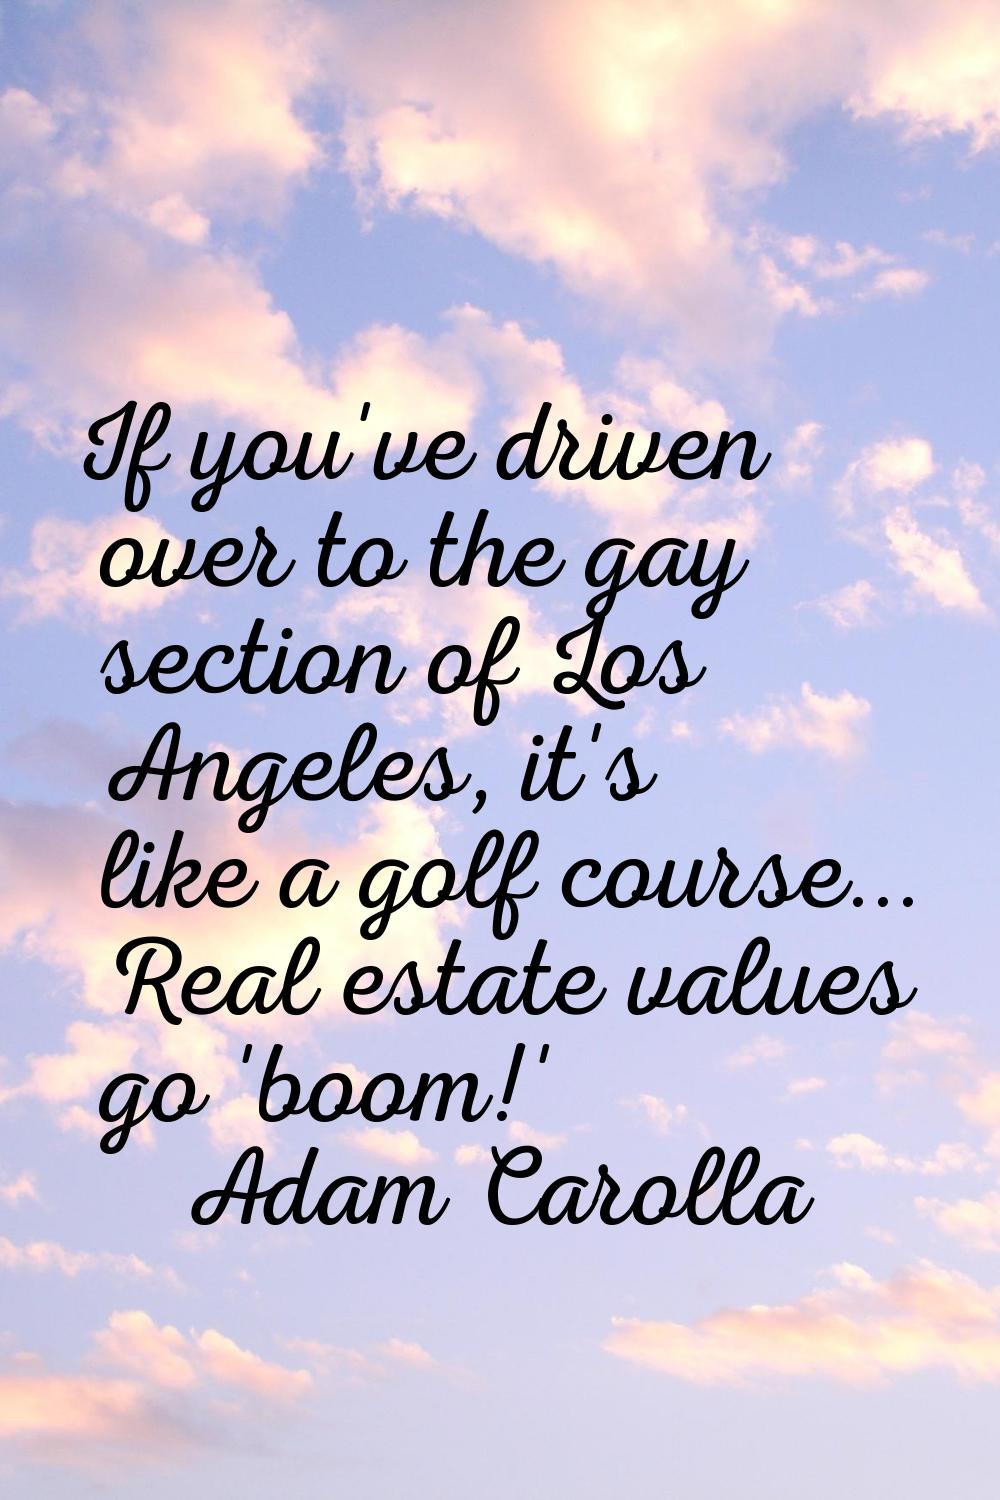 If you've driven over to the gay section of Los Angeles, it's like a golf course... Real estate val